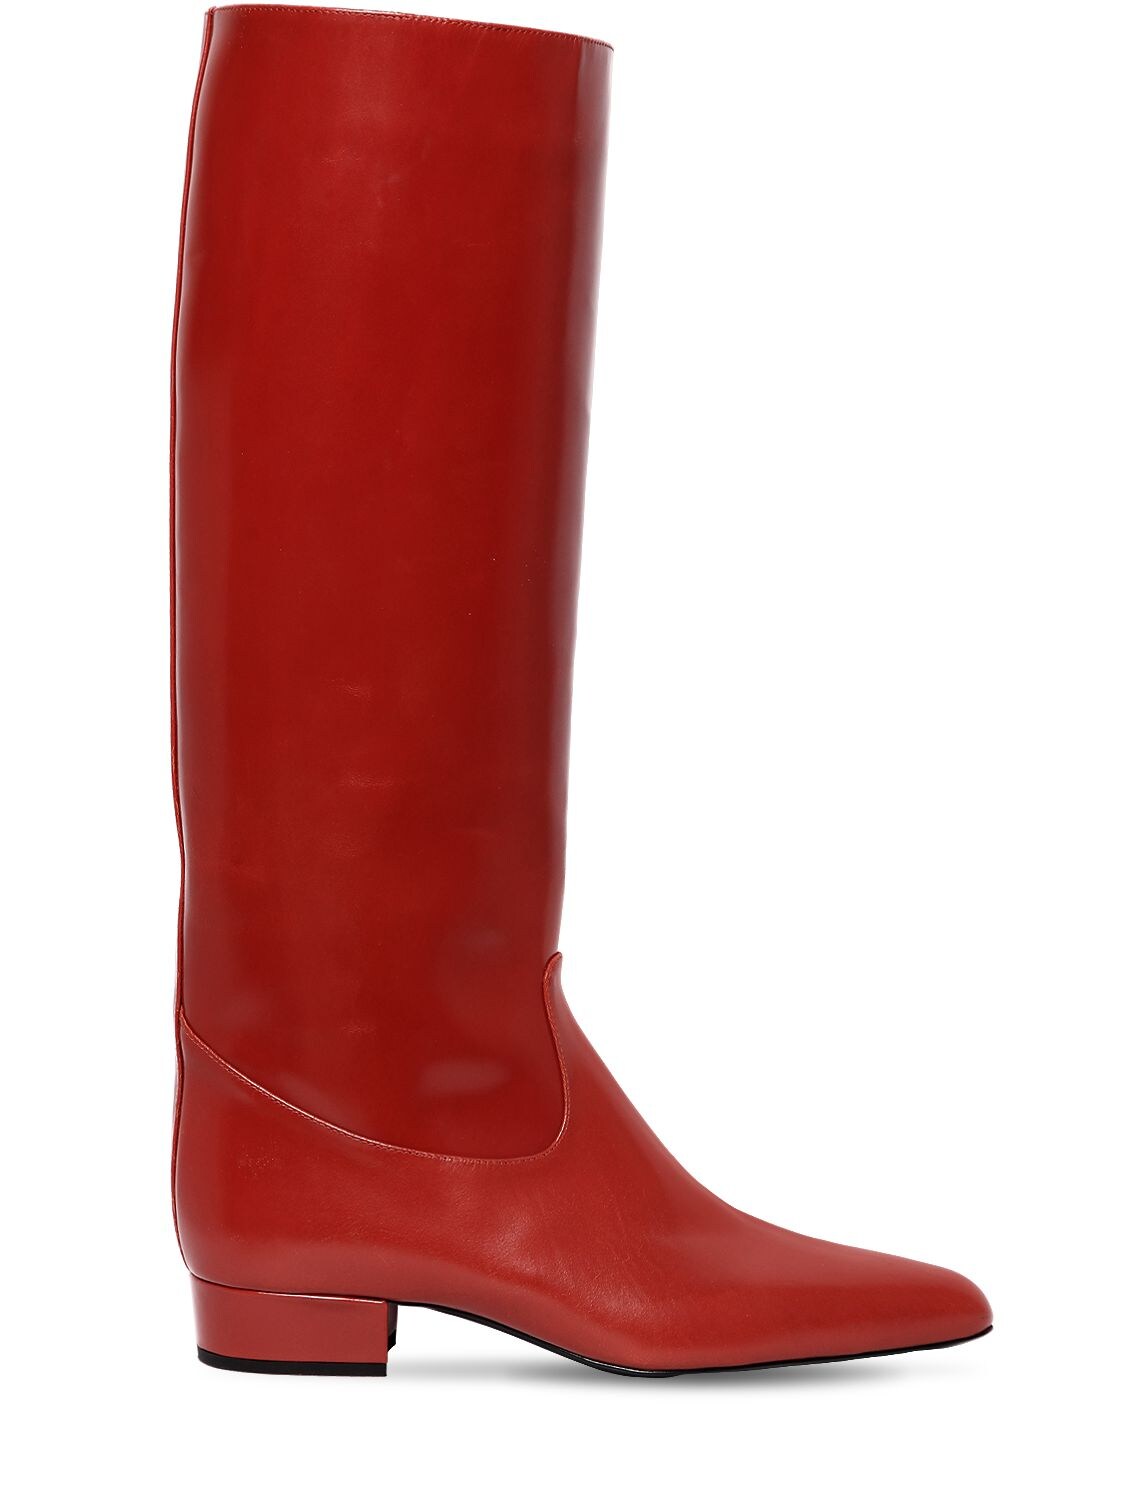 red tall boots for sale